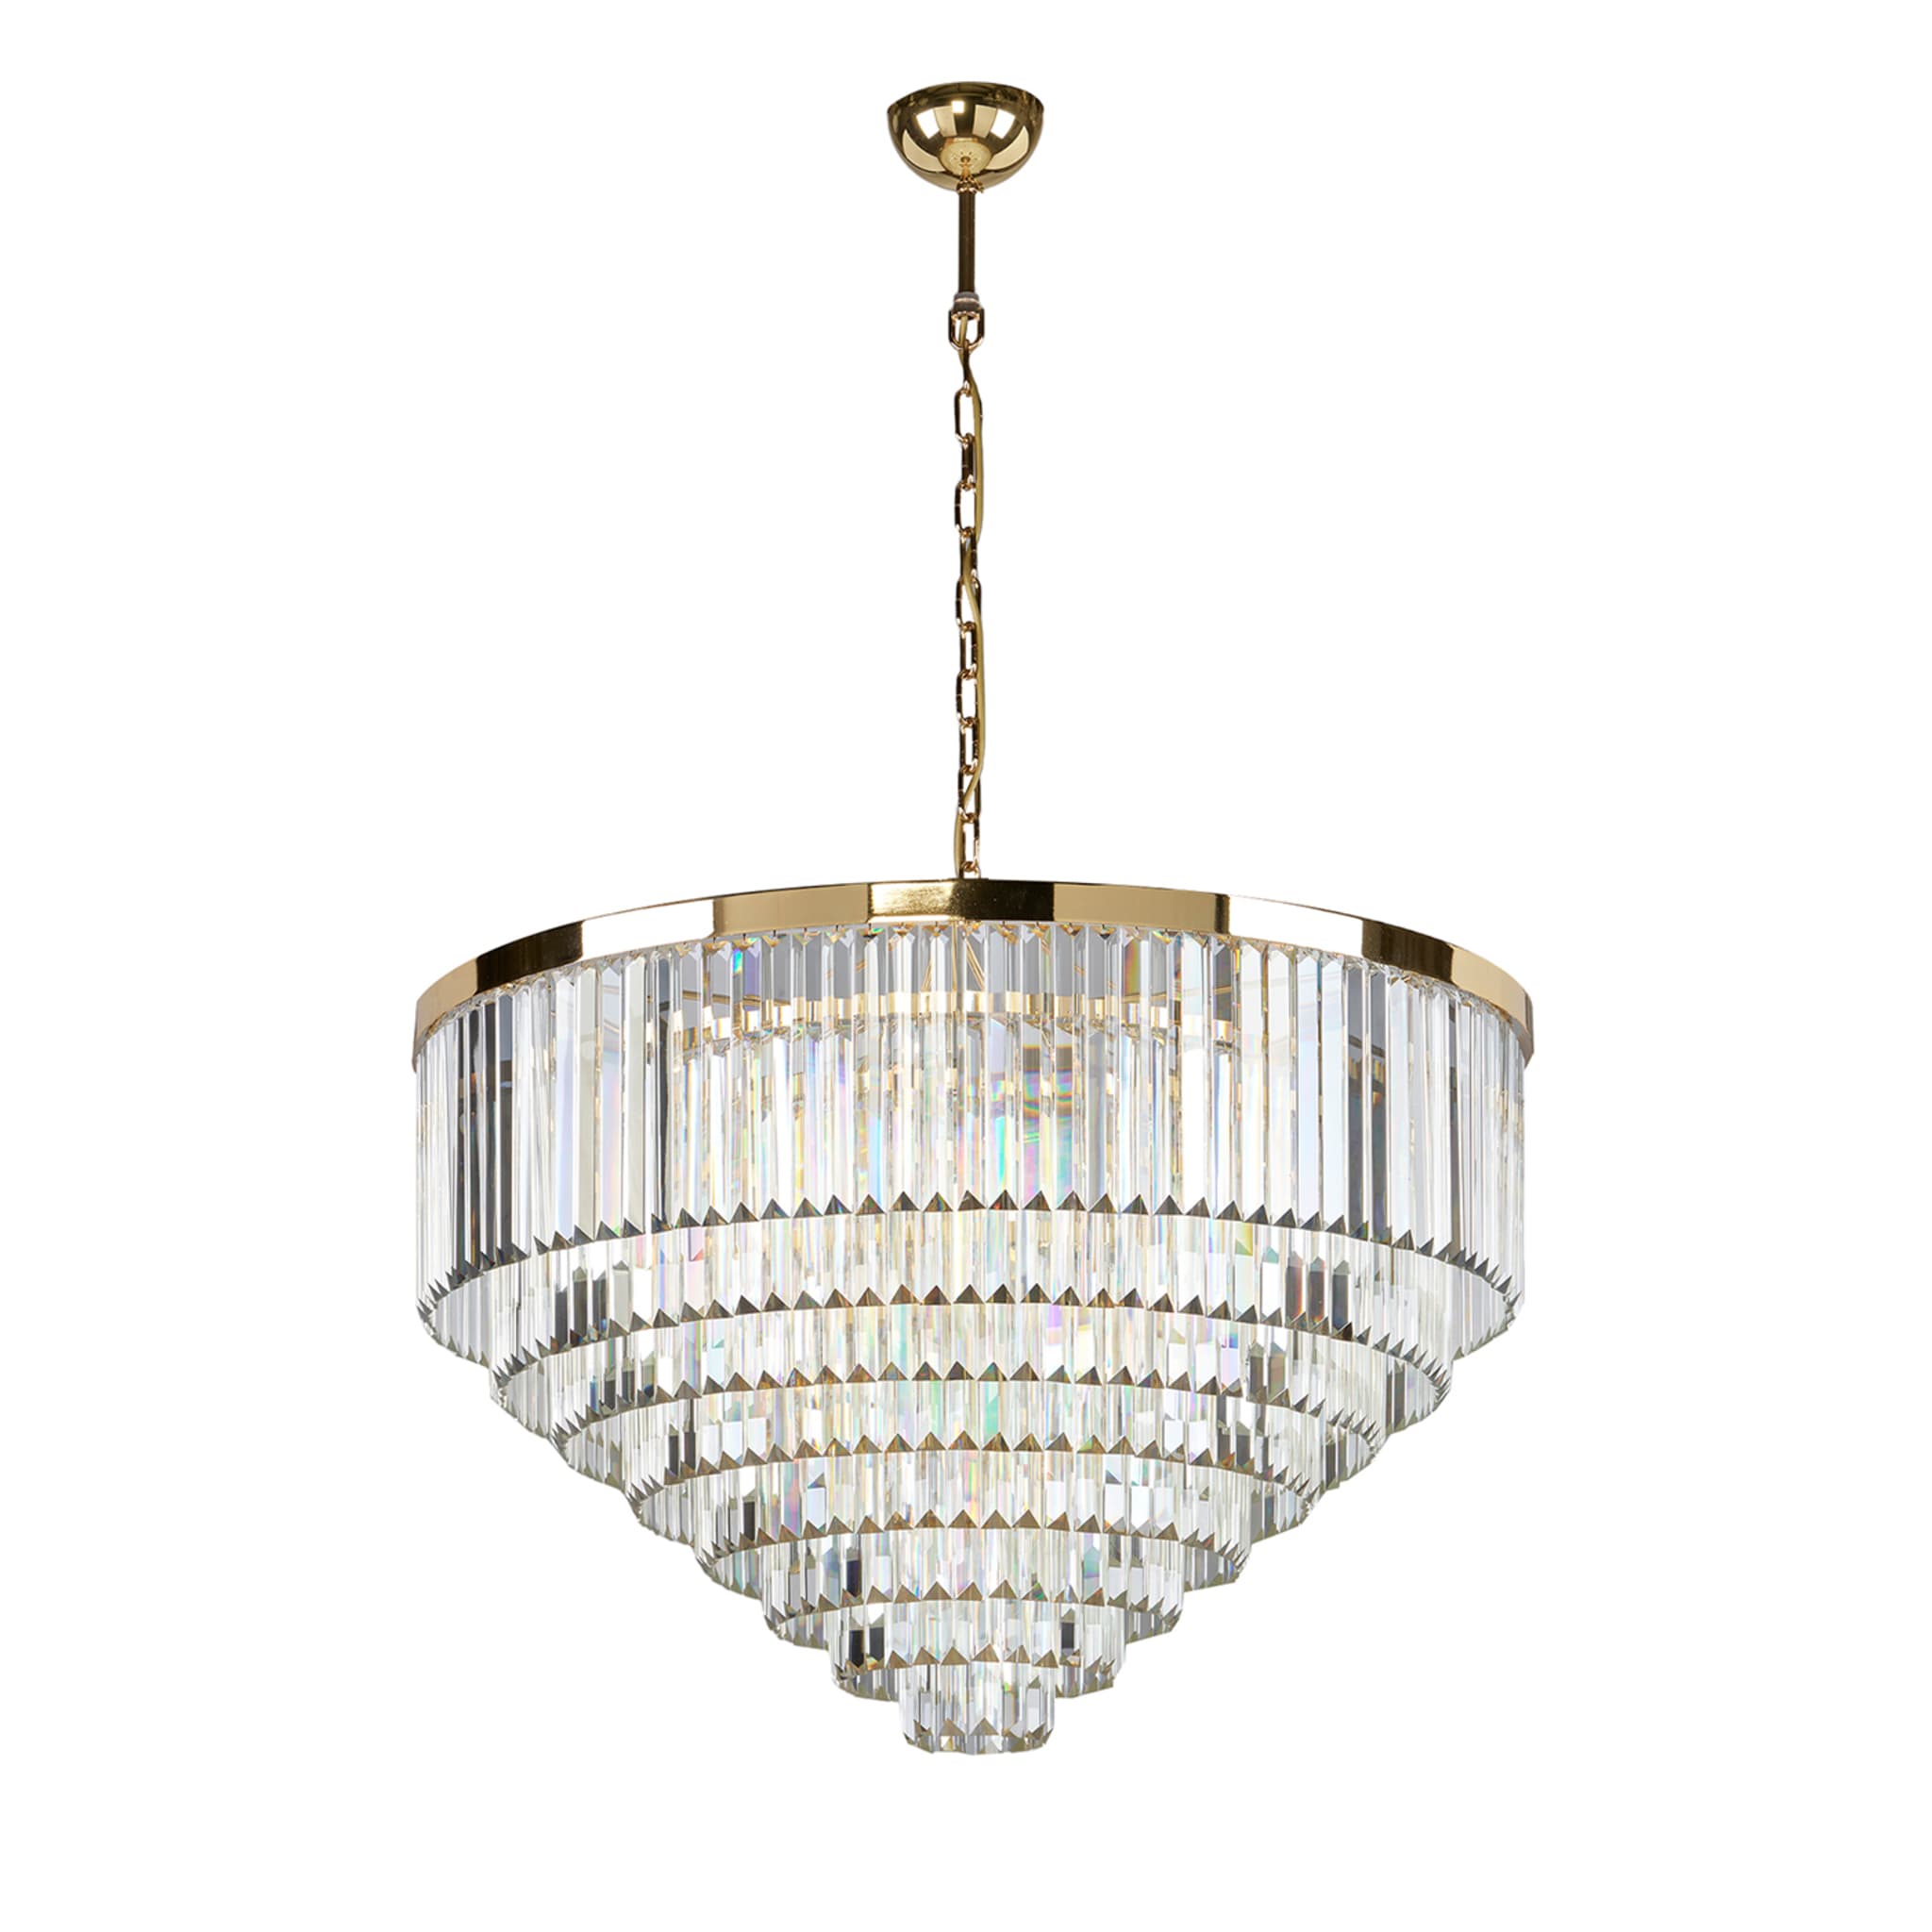 1484 - 13 Lights Gold Suspension Lamp - Main view